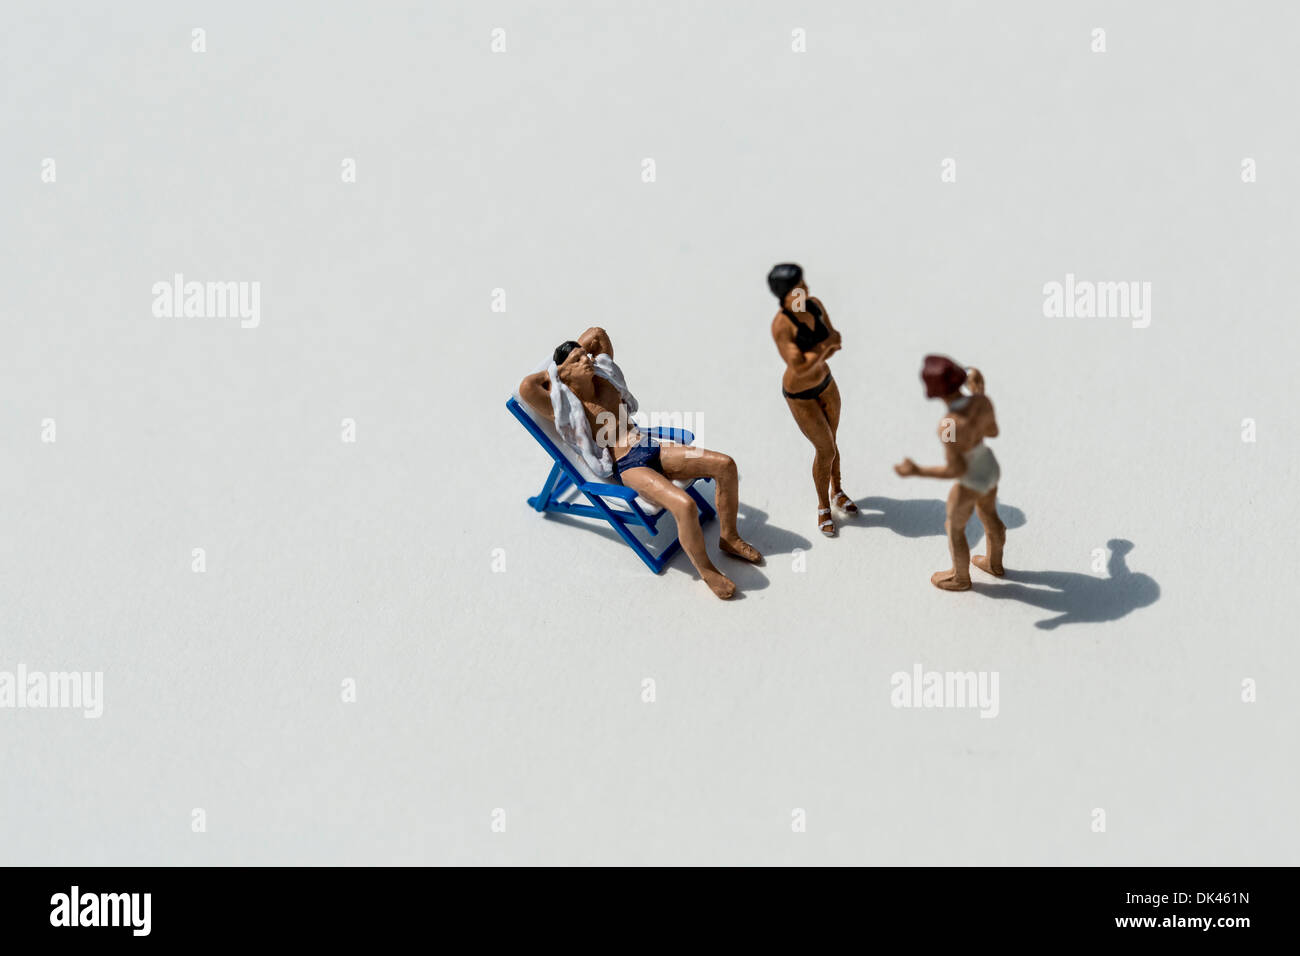 Figurines on a white background socializing at the beach club Stock Photo